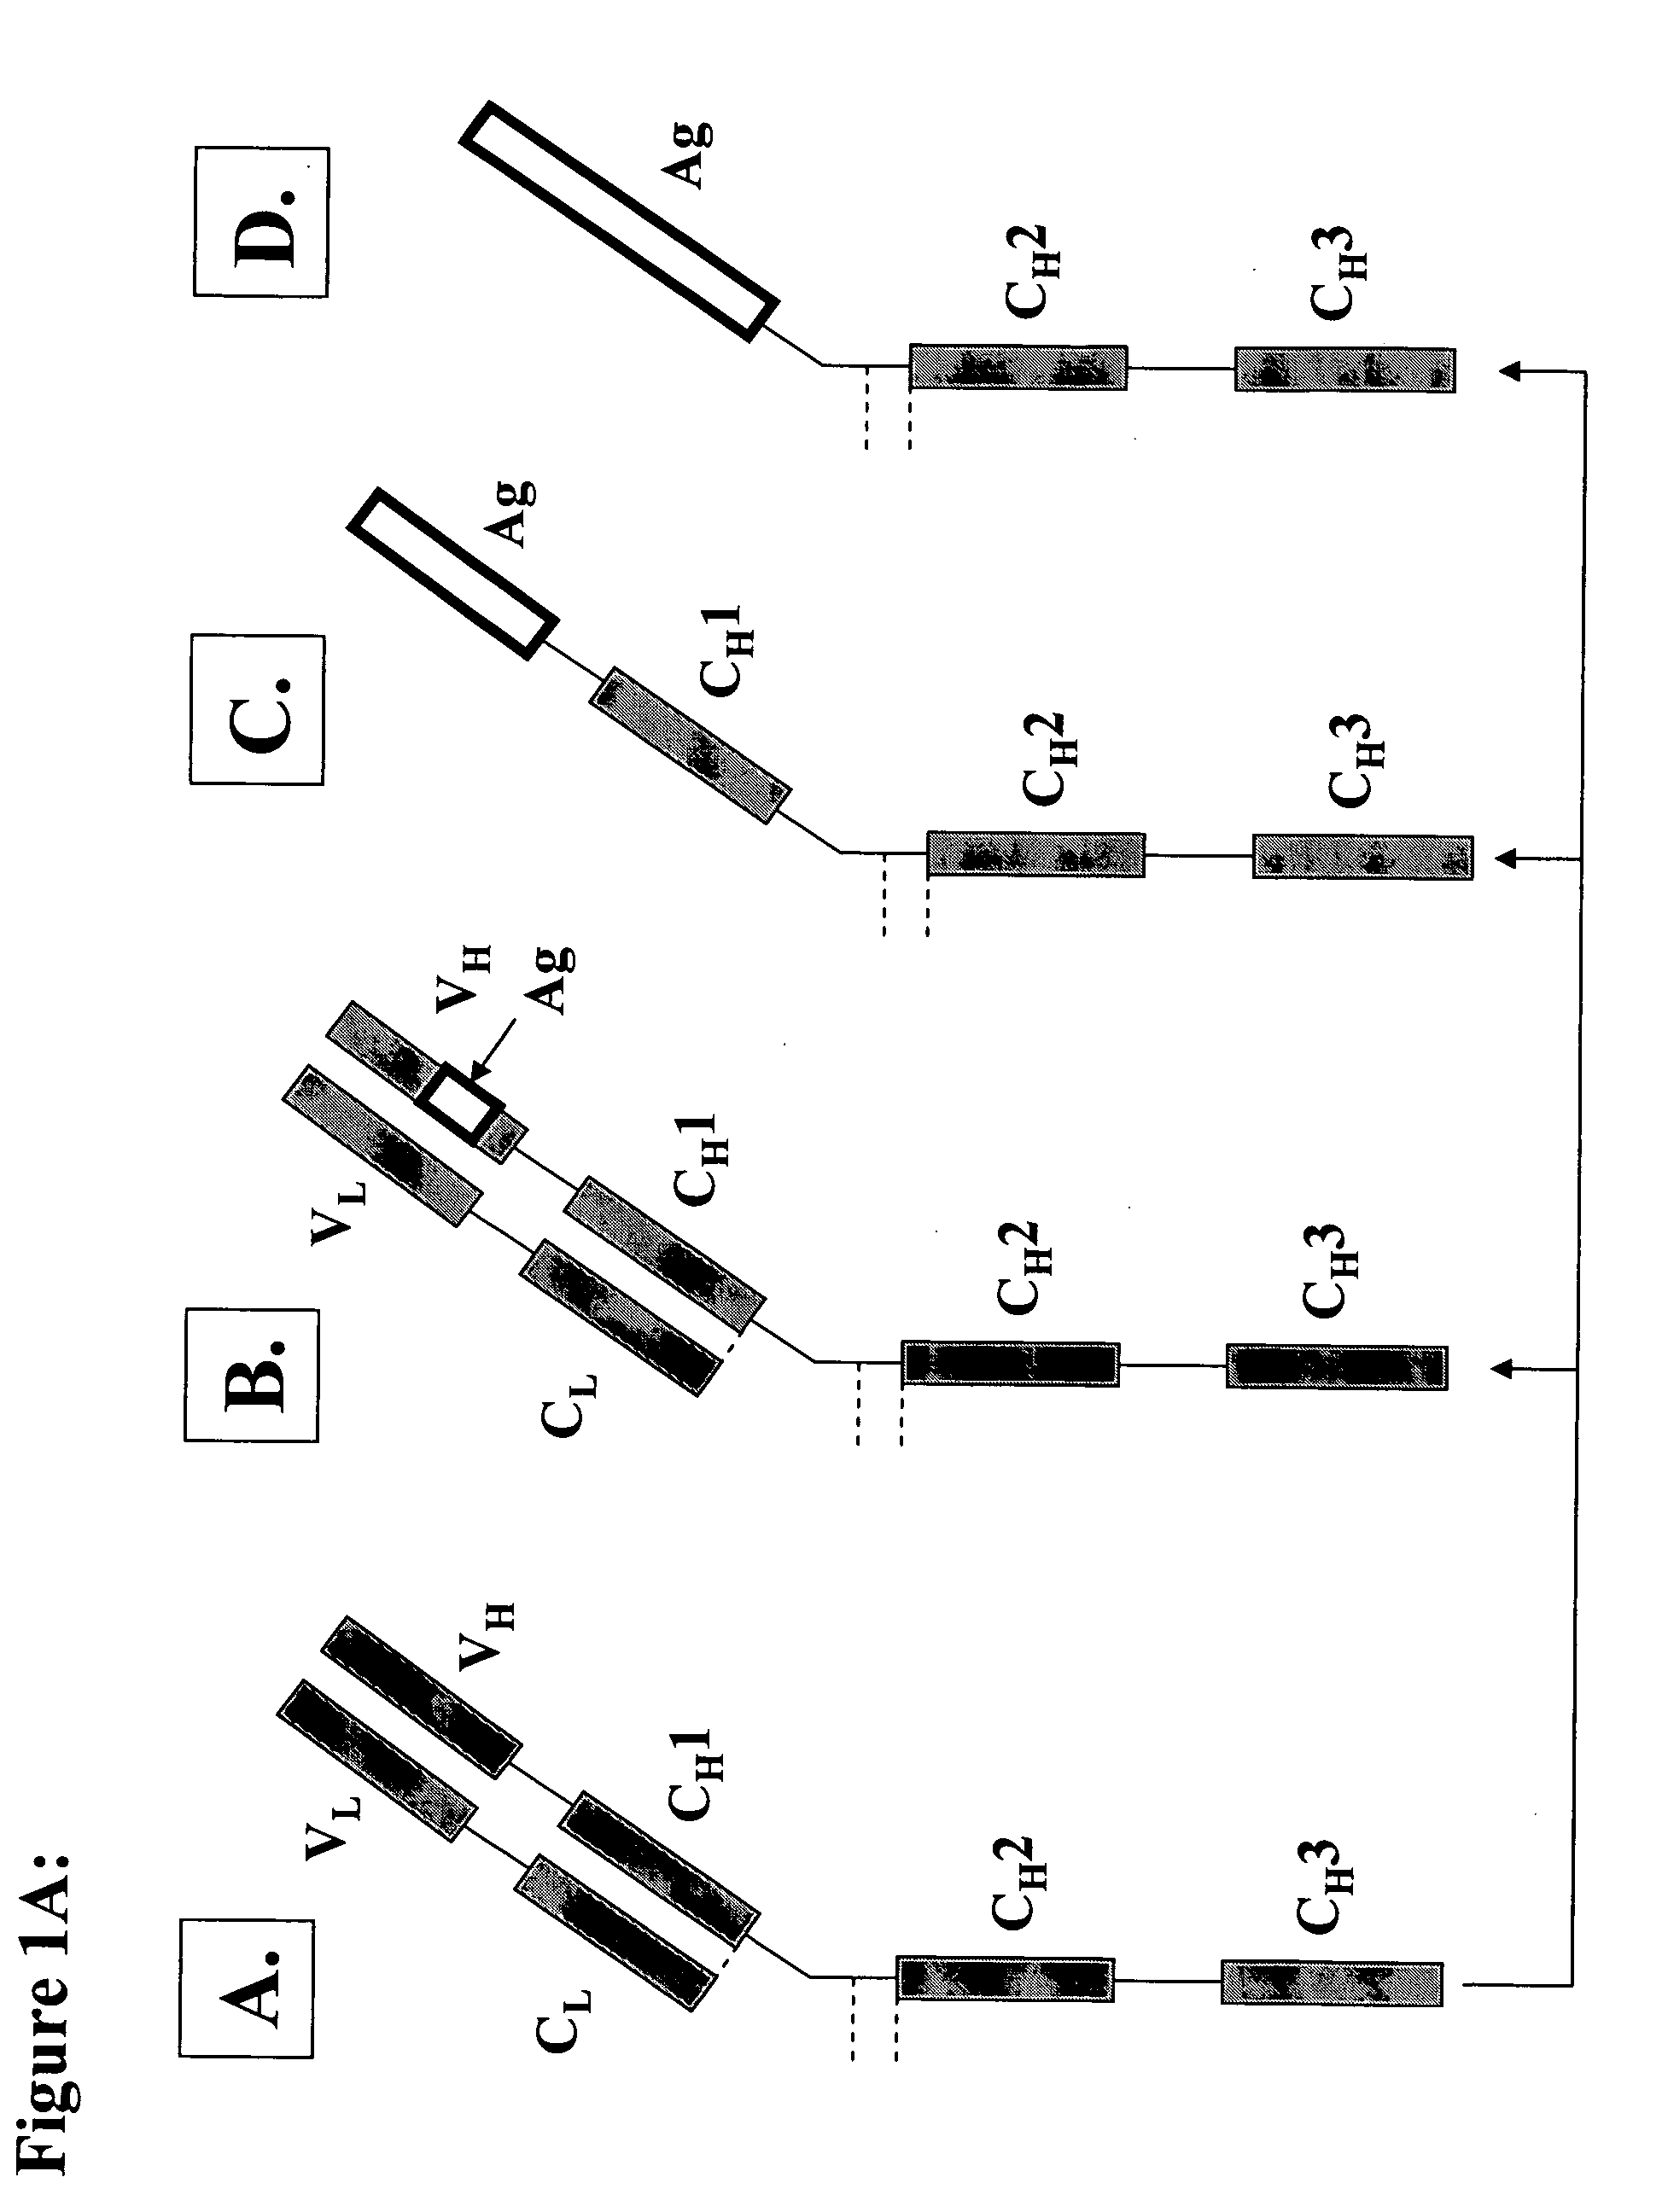 Methods and compositions to generate and control the effector profile of t cells by simultaneous loading and activation of selected subsets of antigen presenting cells